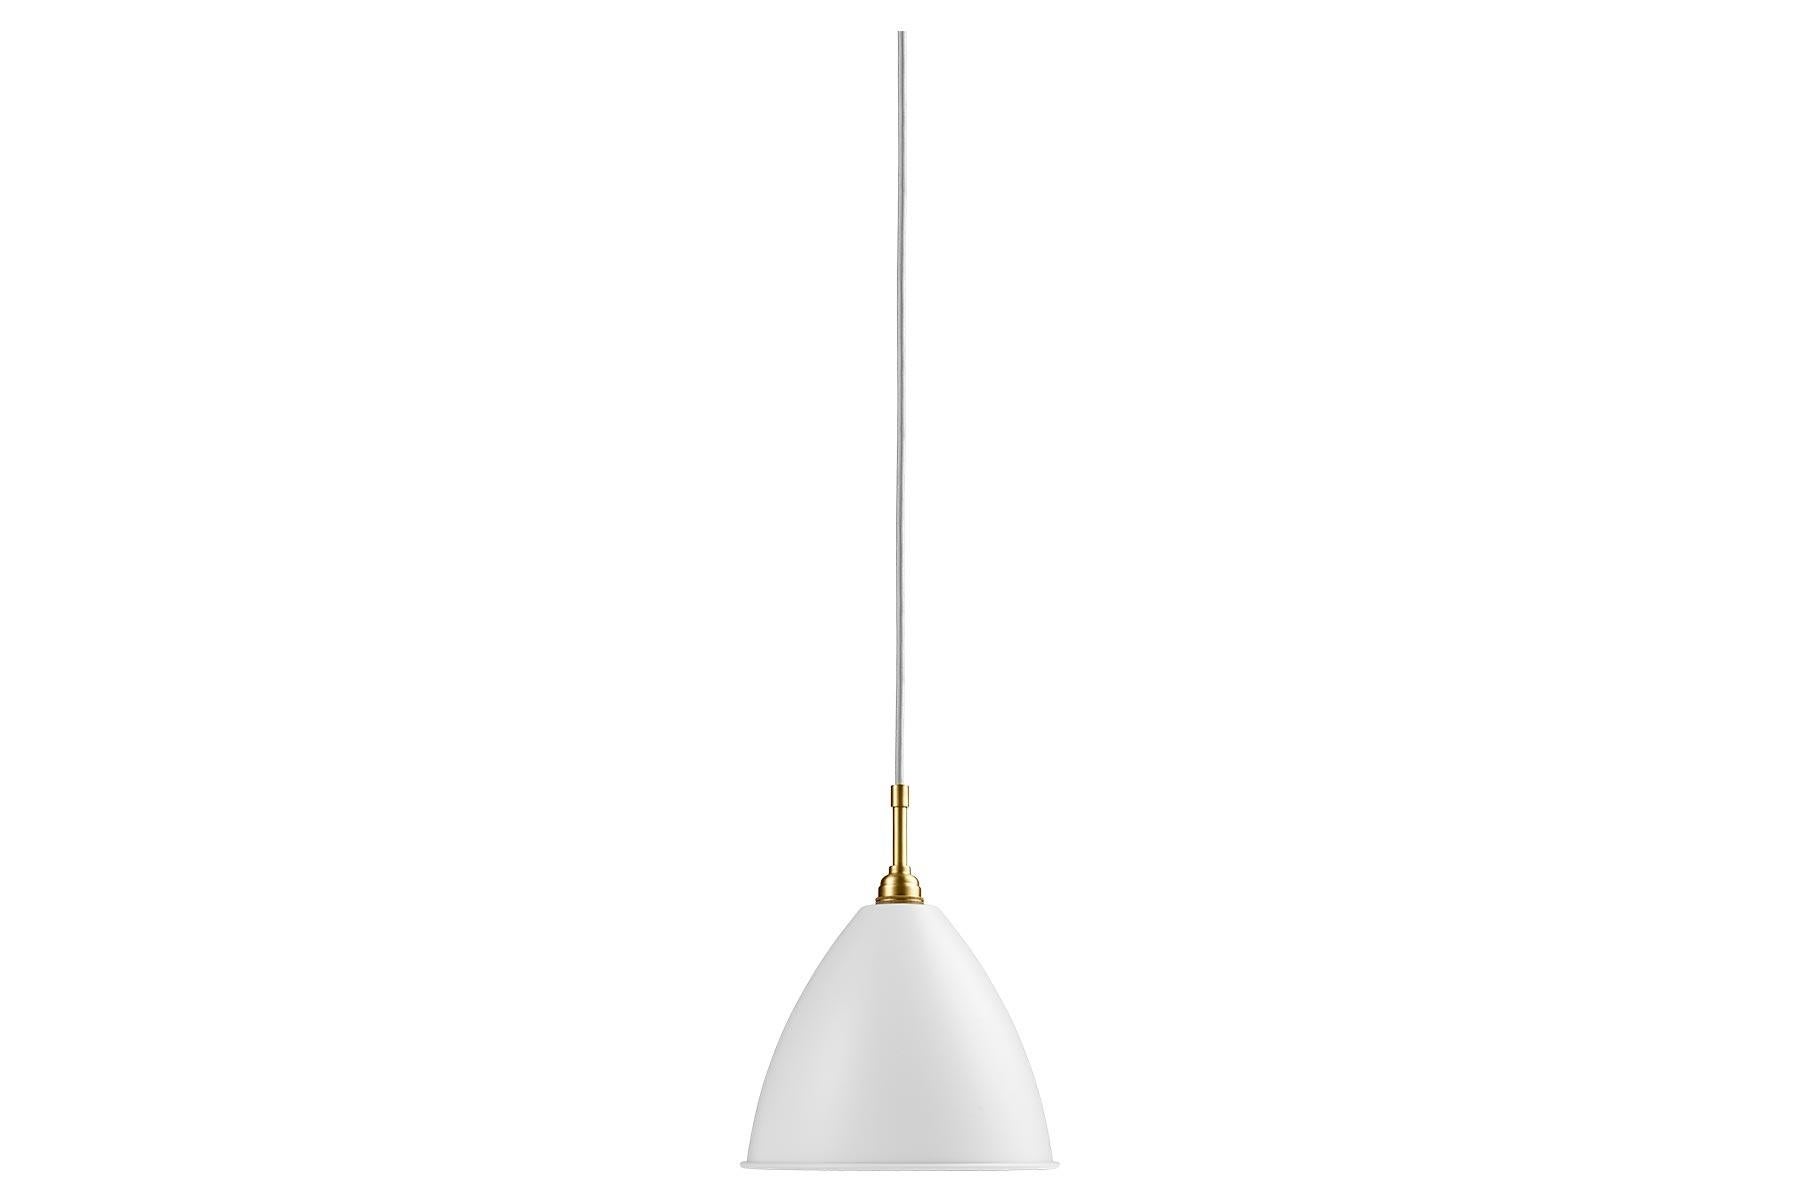 The Bestlite BL9 Pendant in four sizes and in a numerous of finishes was designed in 1930 by the Bauhaus influenced British designer Robert Dudley Best. With its great heritage and contemporary look, the BL9 Pendant is a coveted design worldwide.